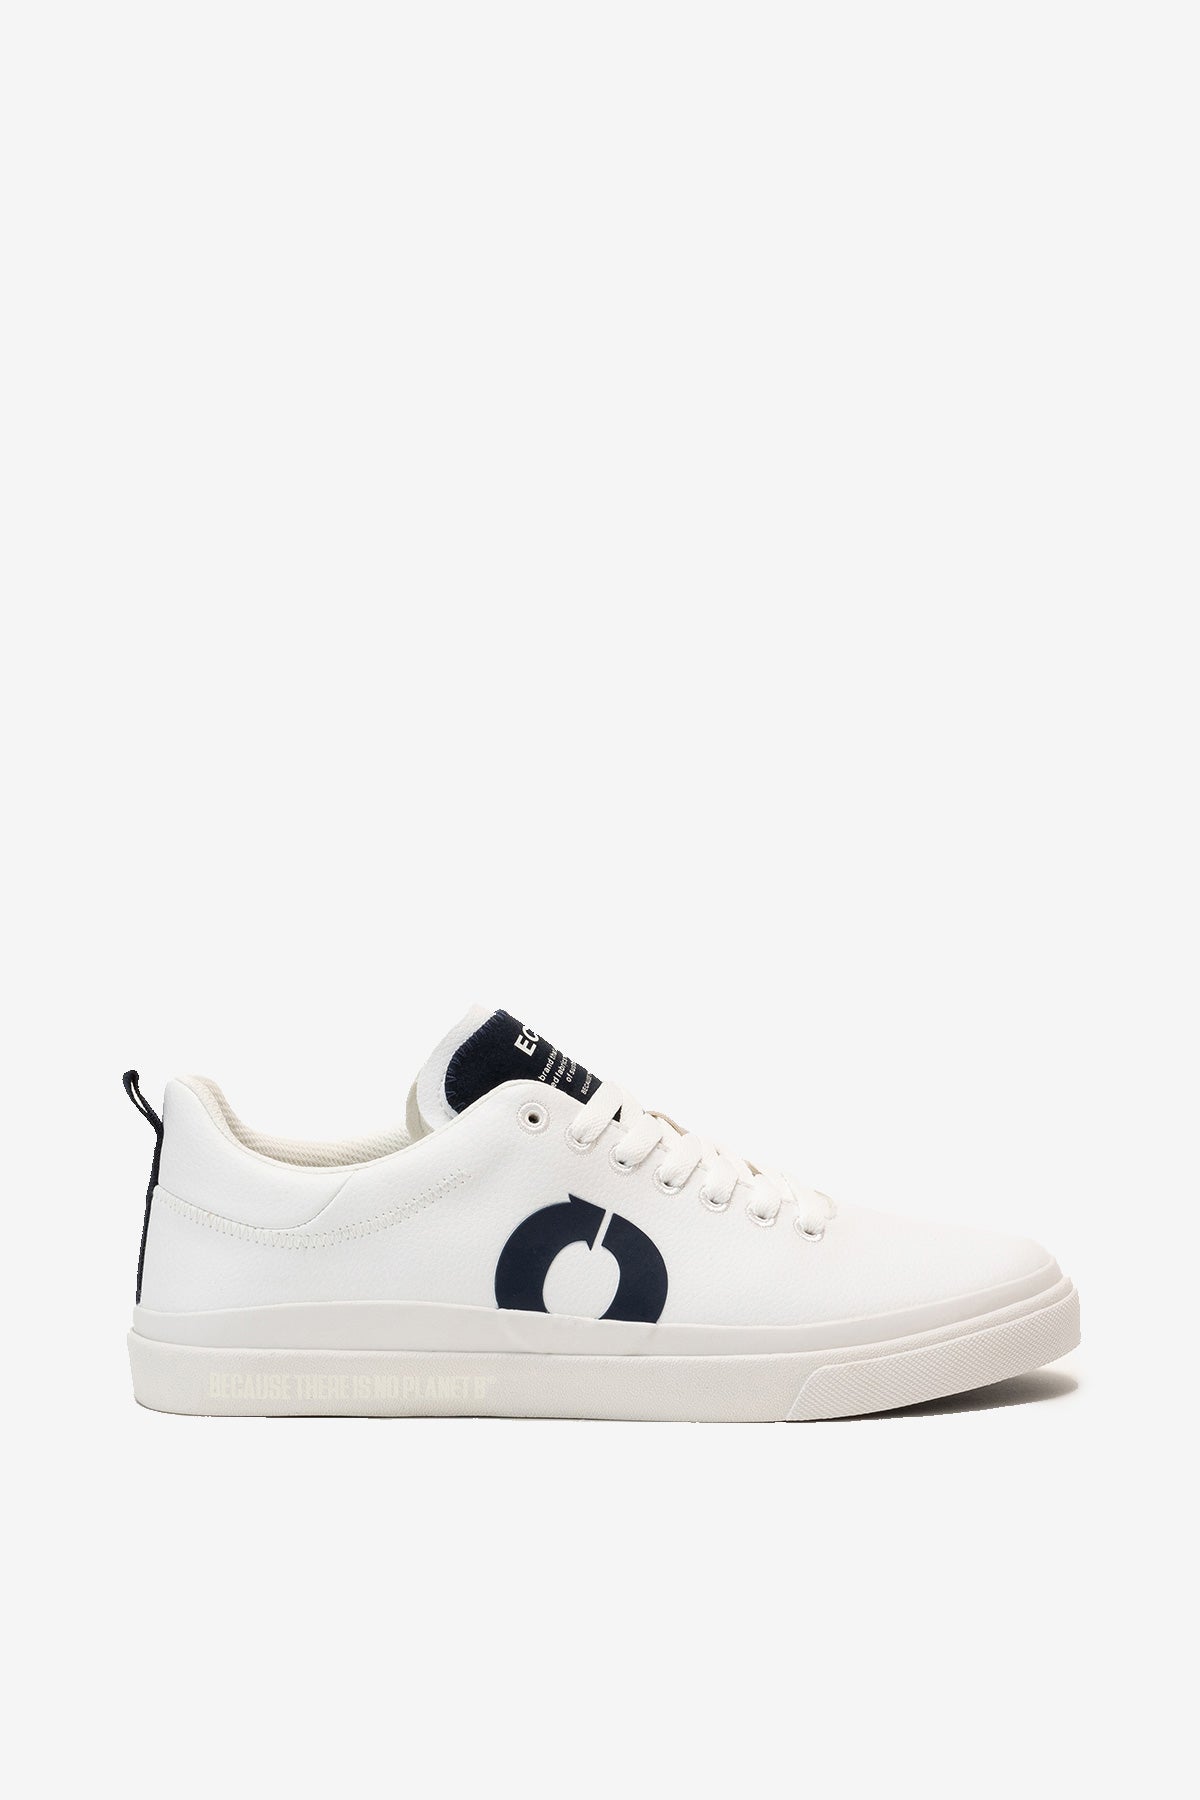 NAVY BLUE TAMESIS LEATHER TRAINERS